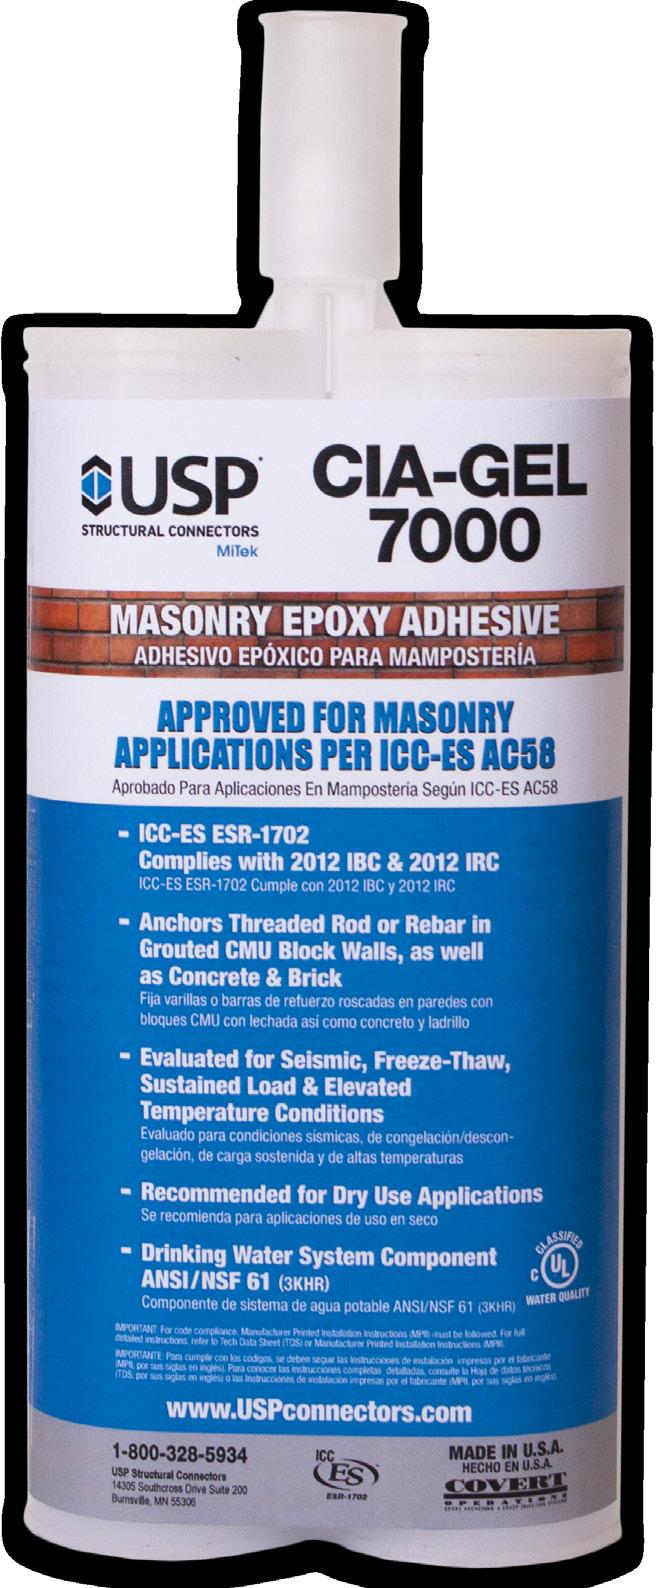 and freeze-thaw suitability conditions. It can also be used to install anchor rods into uncracked concrete and reinforced brick. It is a low odor, solvent free, non-shrink adhesive.